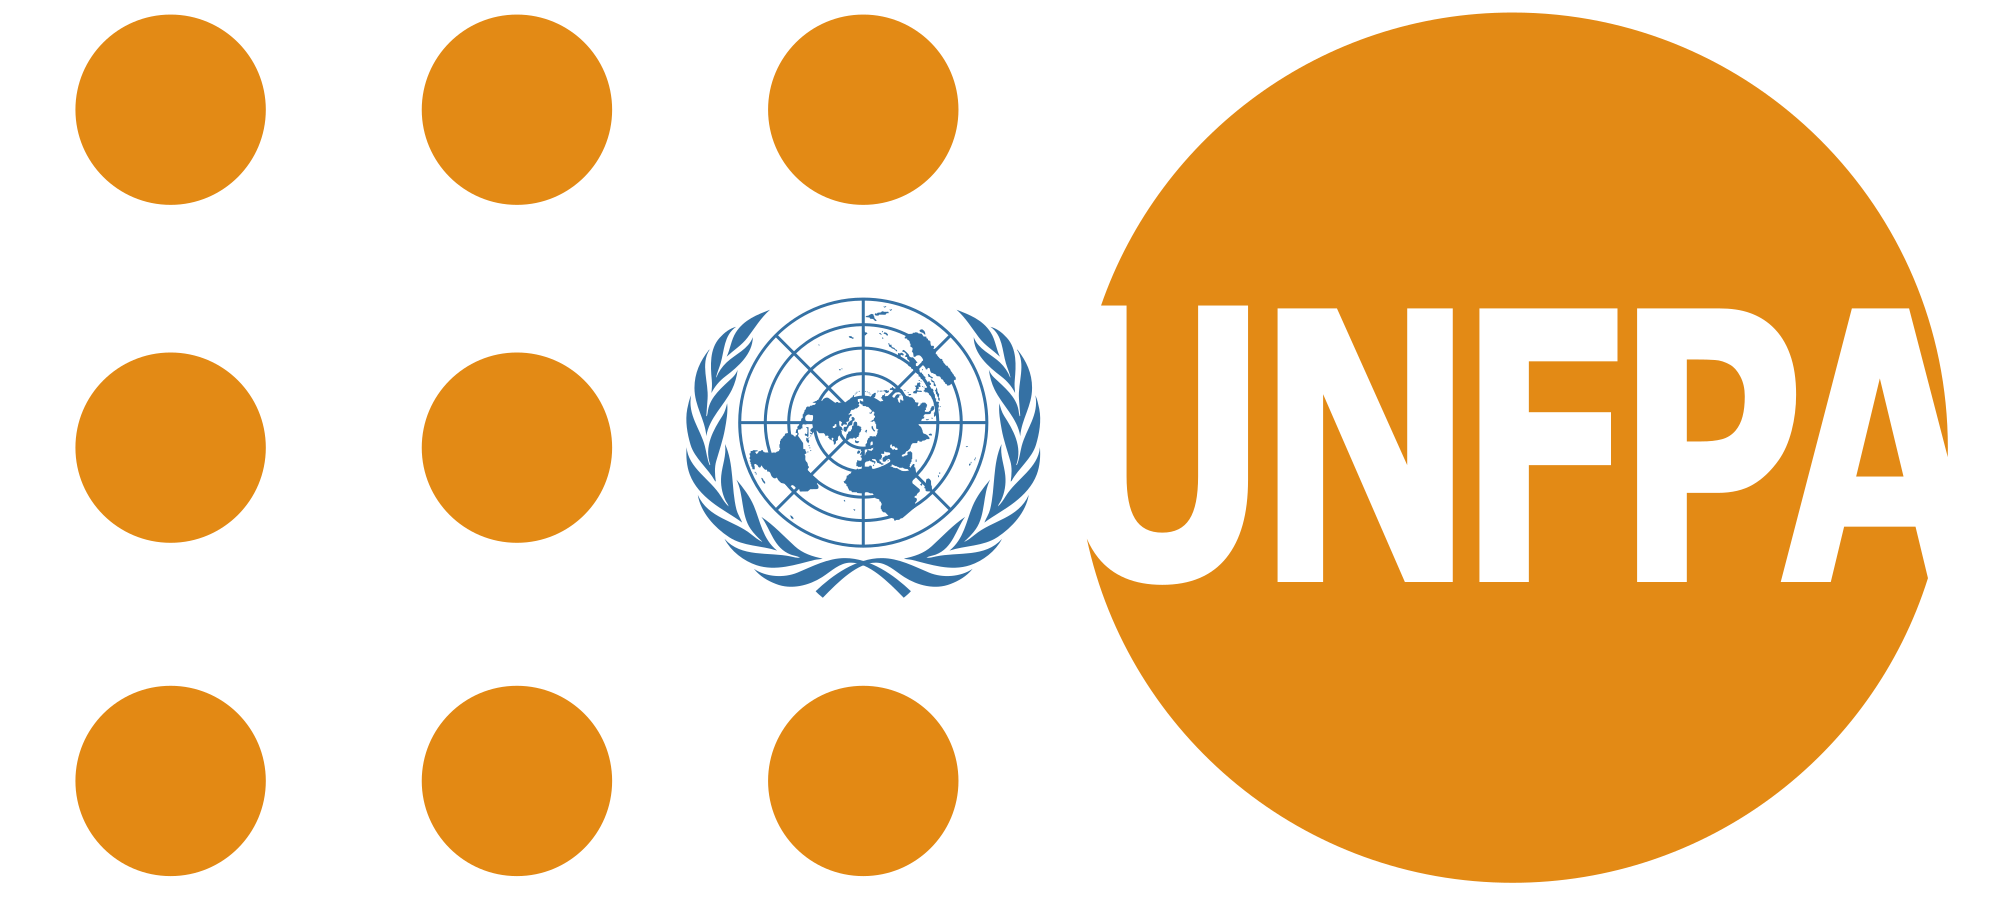 the-power-to-choose-the-number-timing-and-spacing-of-children-can-bolster-economic-and-social-development-new-unfpa-report-shows